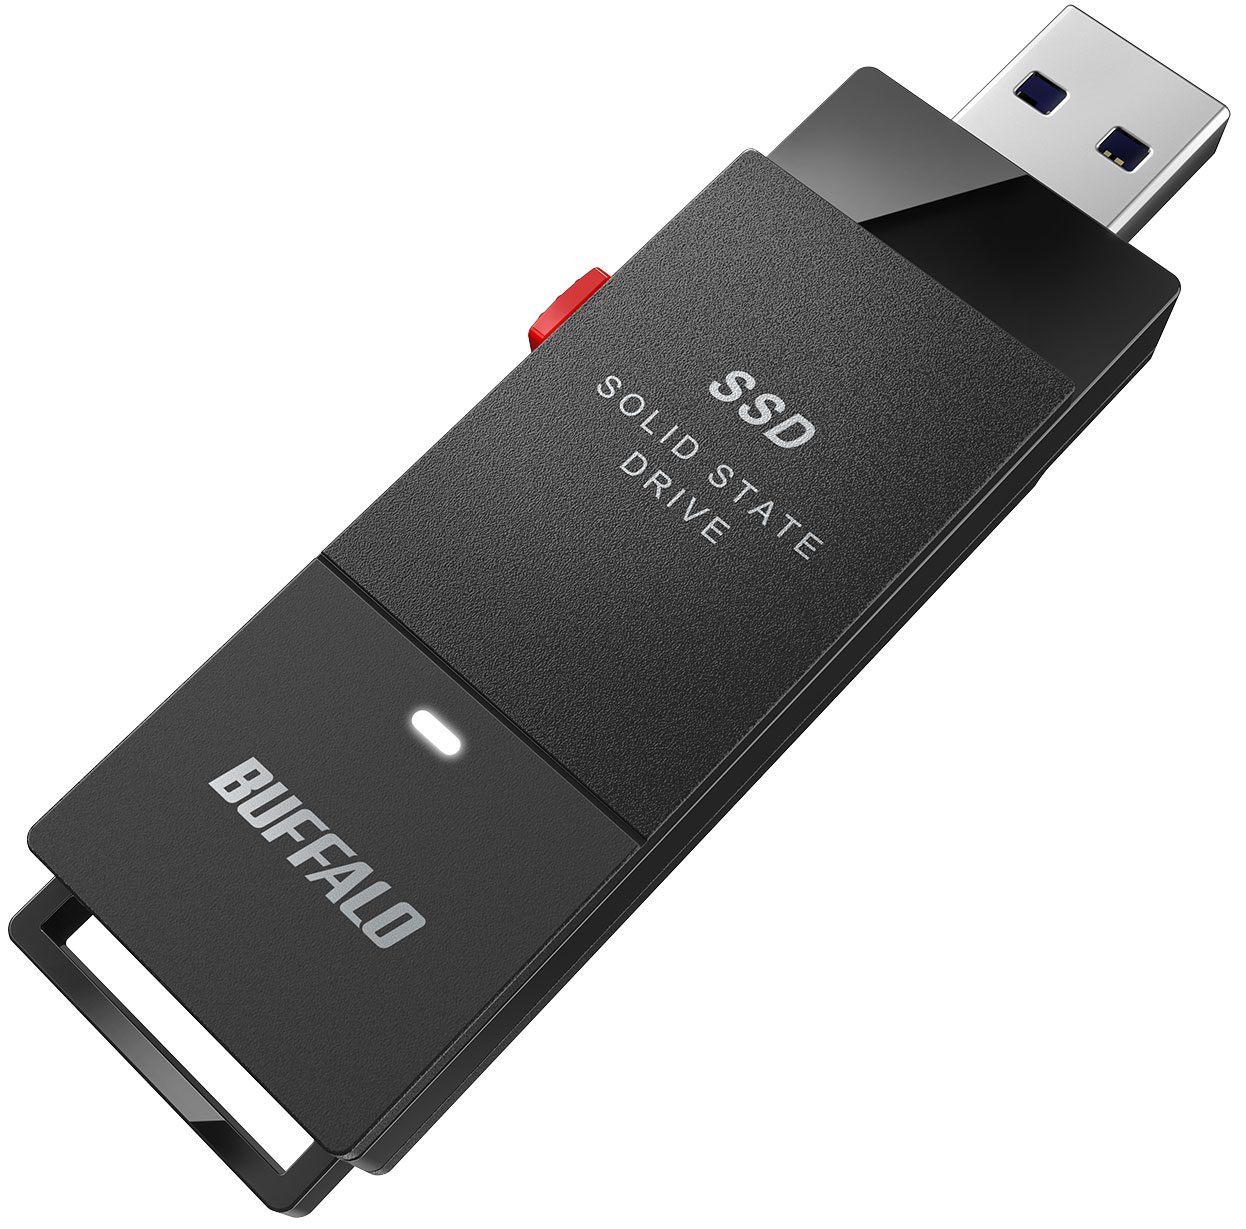 SSD-PUT Rugged and Portable Solid State Drive Stick | Buffalo Americas